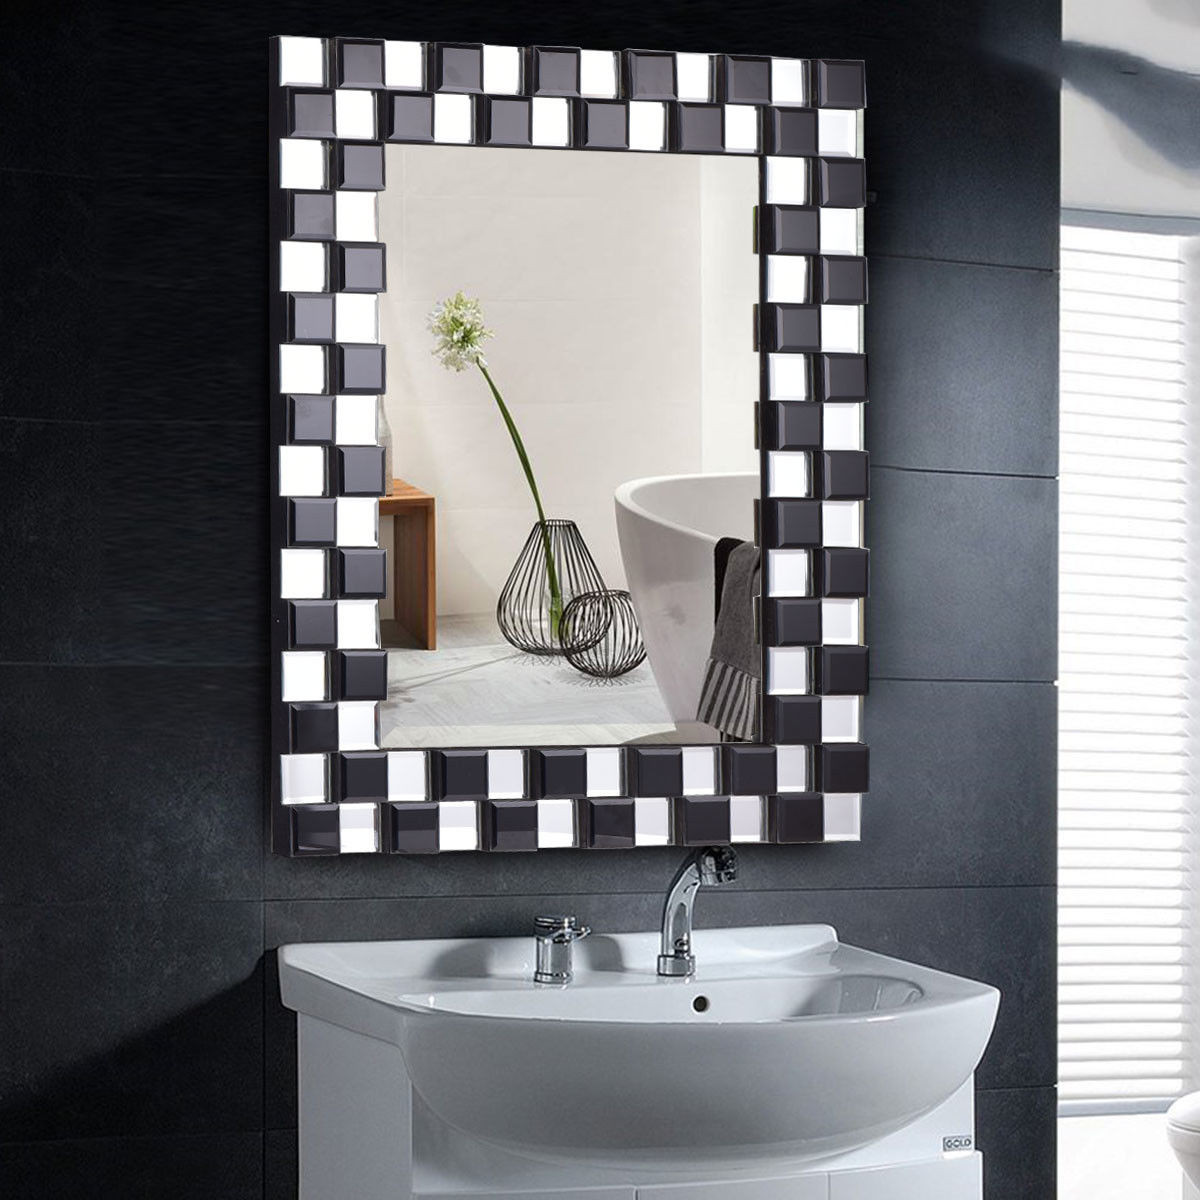 23.5 In. x 31.5 In. Rectangular Wall-Mounted Wooden Frame Bathroom Mirror